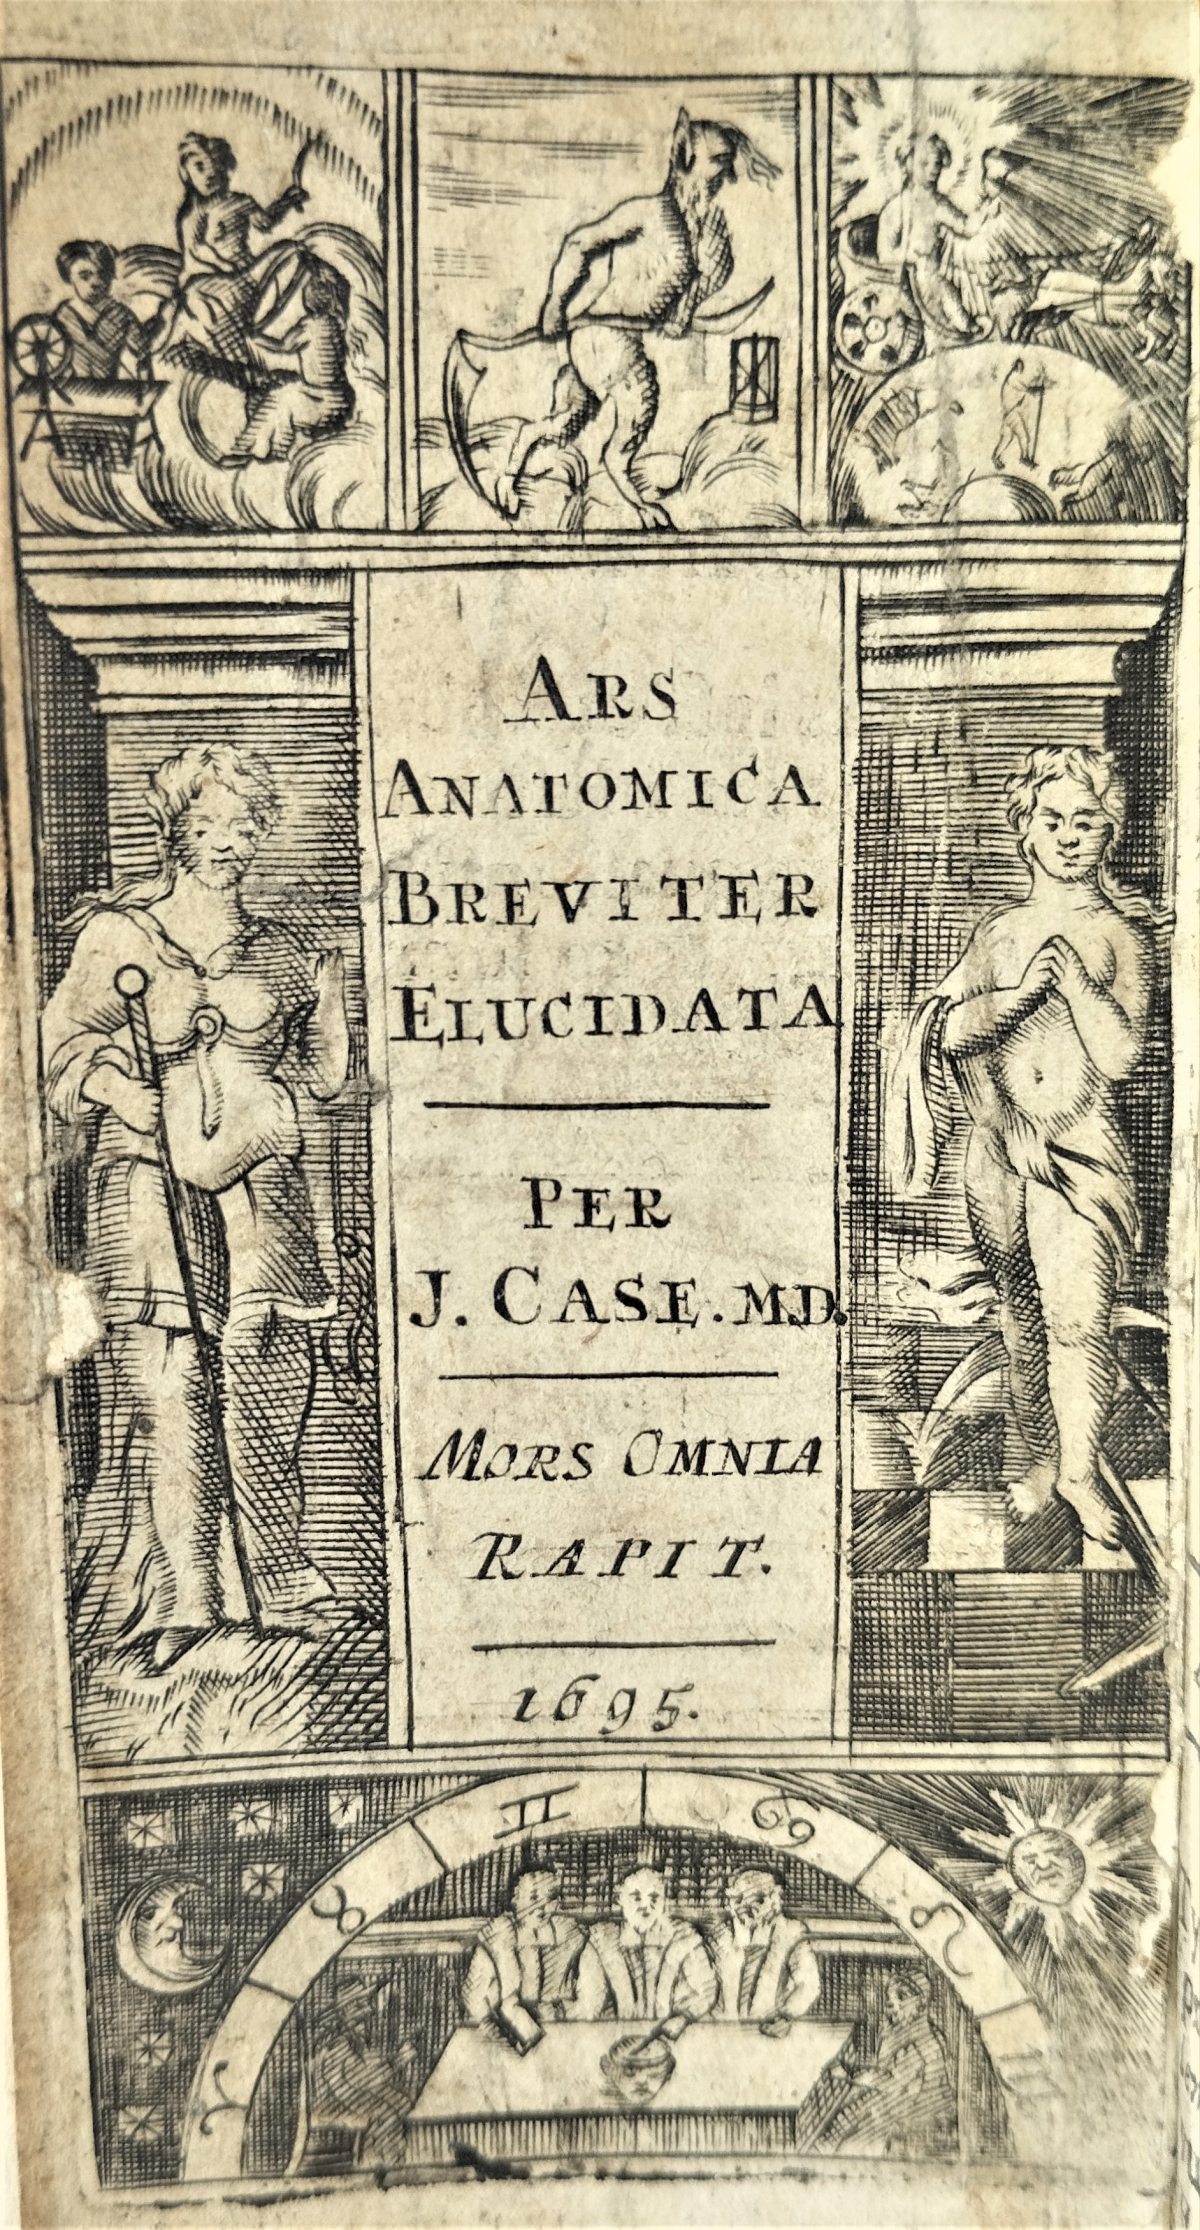 Engraved title page with various decorations, at the center the title "Ars anatomica breviter elucidata". 